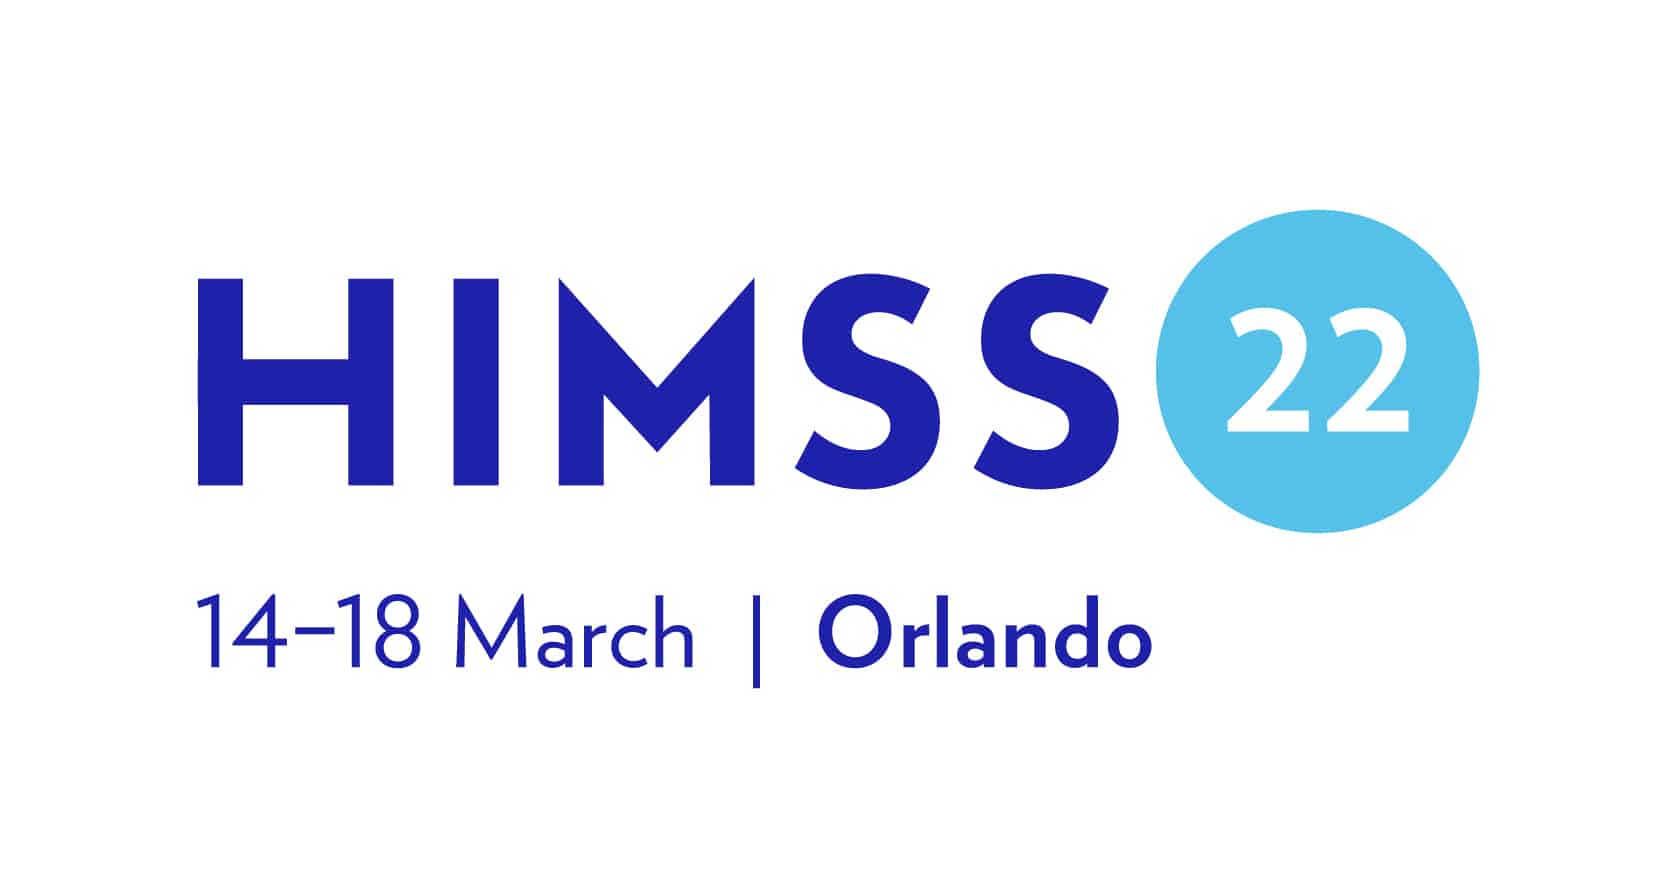 HIMSS22 Global Health Conference & Exhibition eClinicalWorks